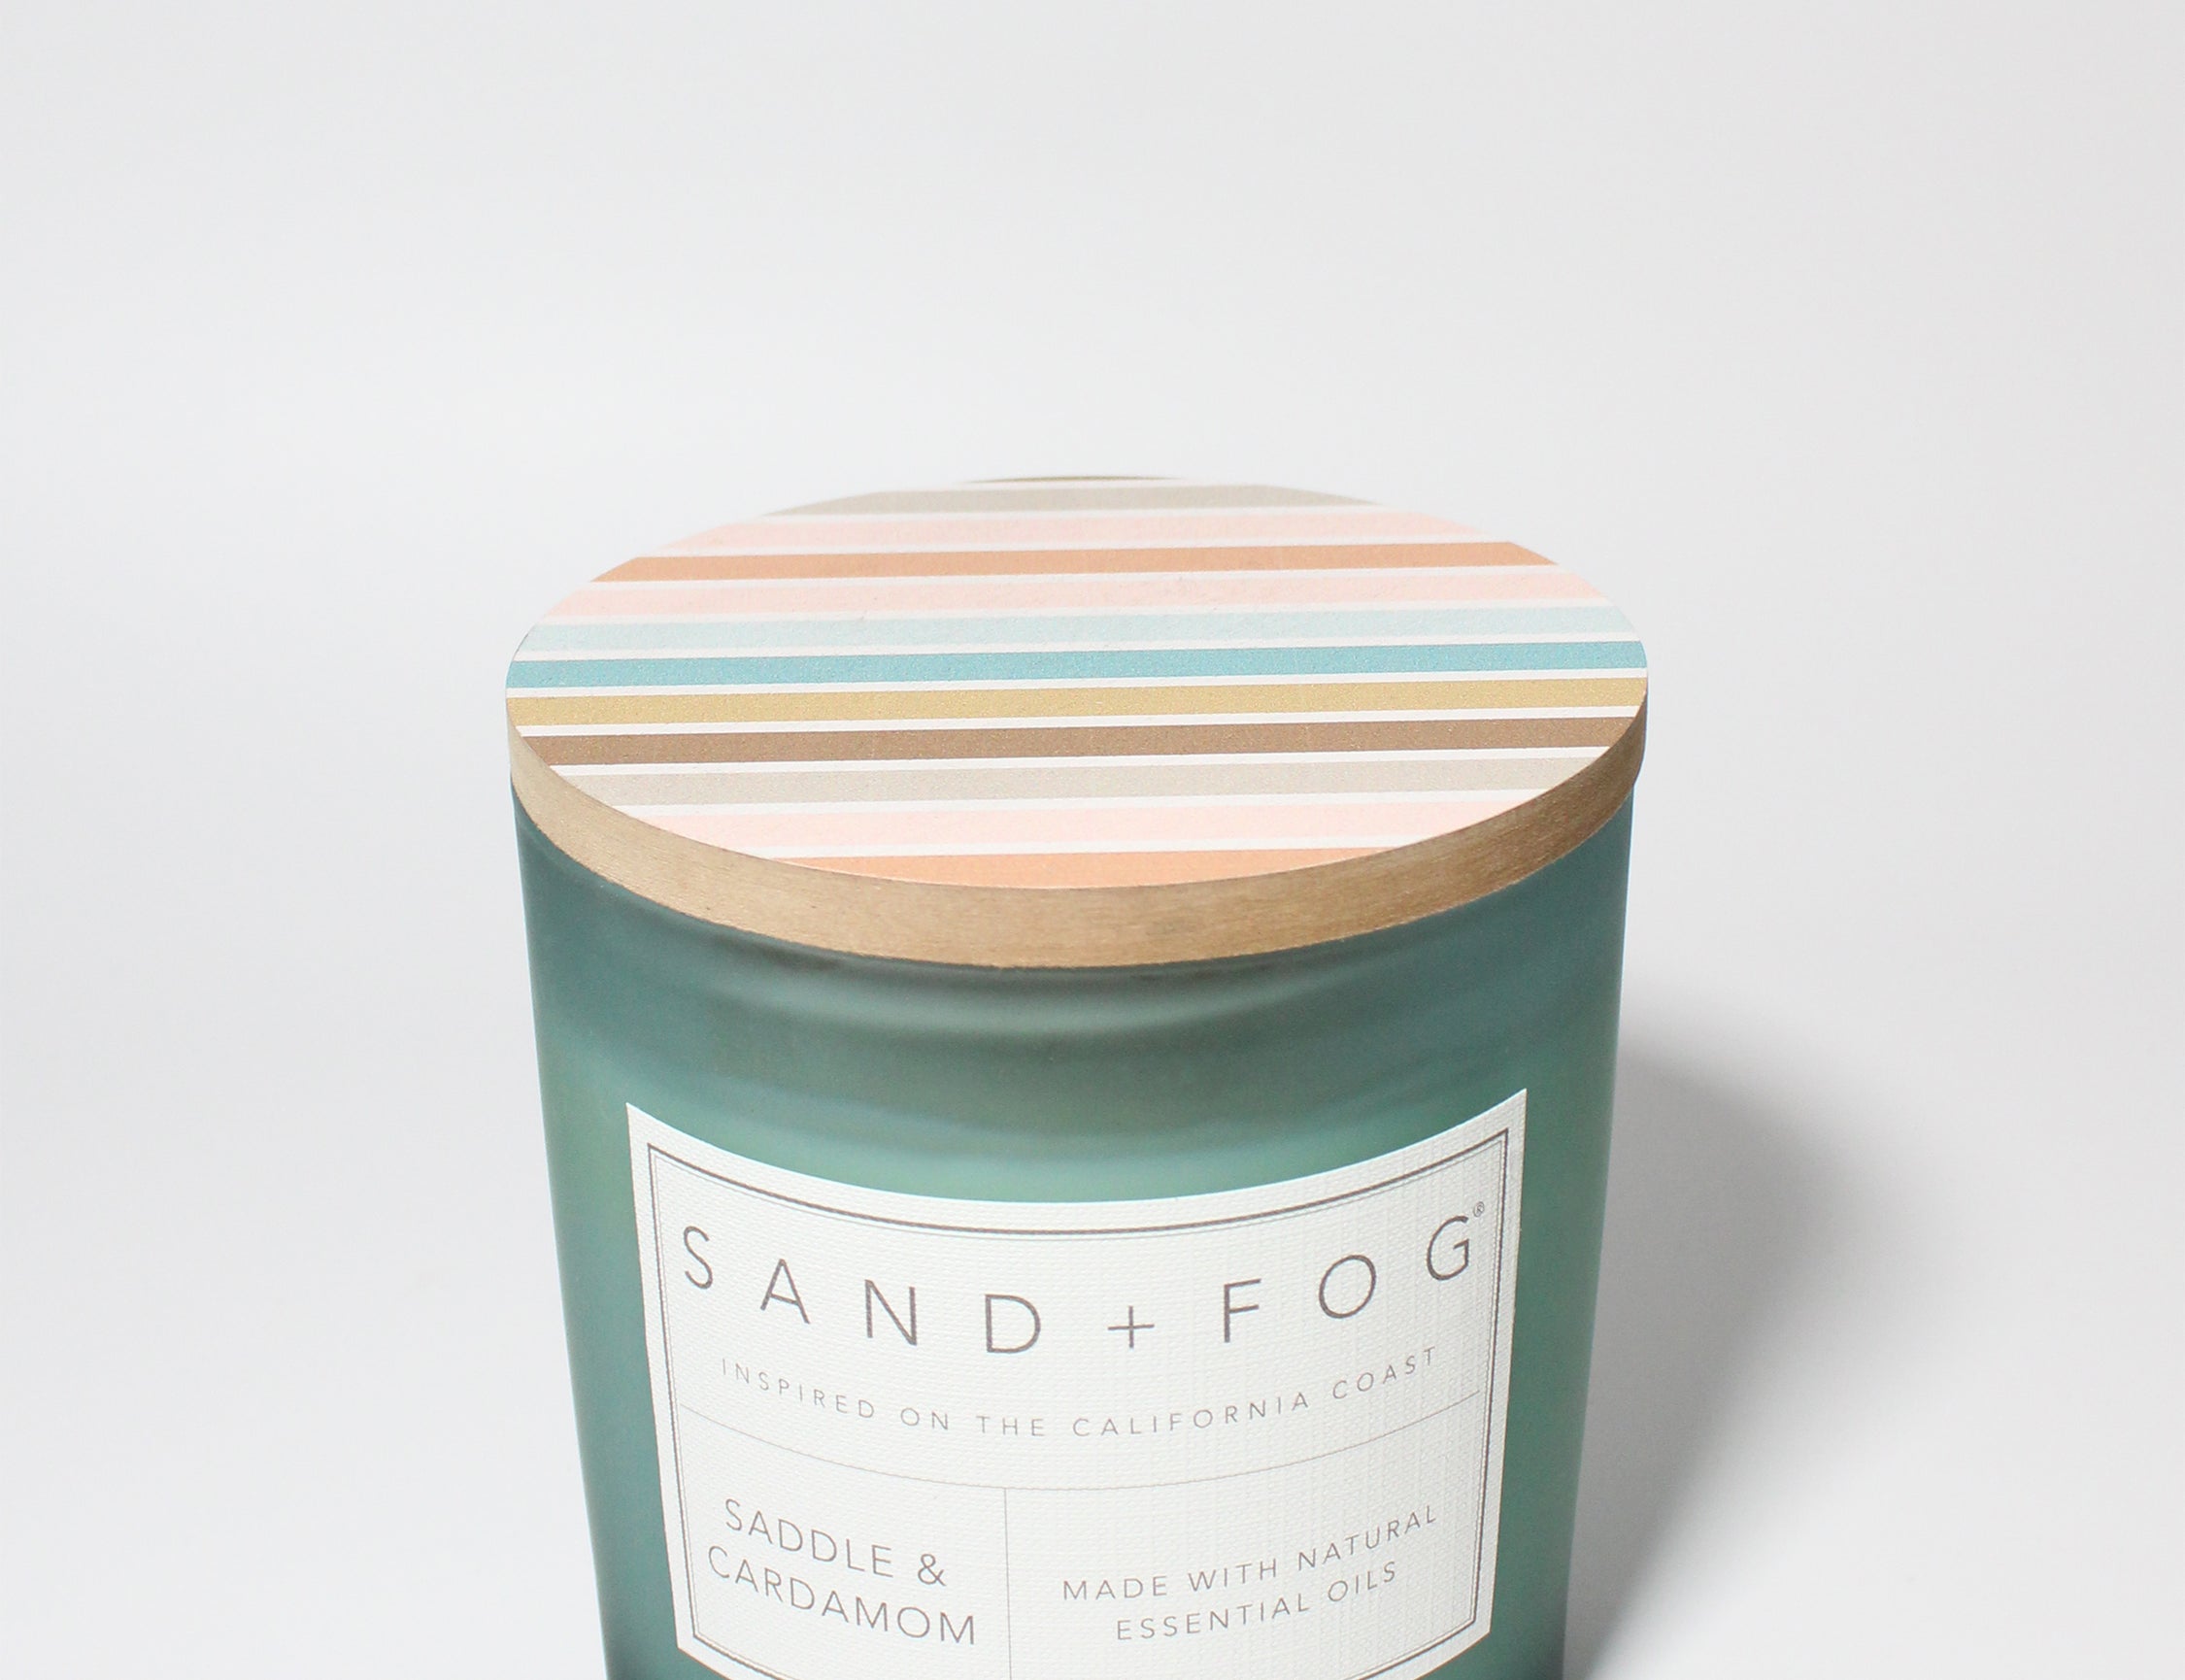 Saddle & Cardamom 21 oz scented candle Seawater vessel with Painted Stripe lid